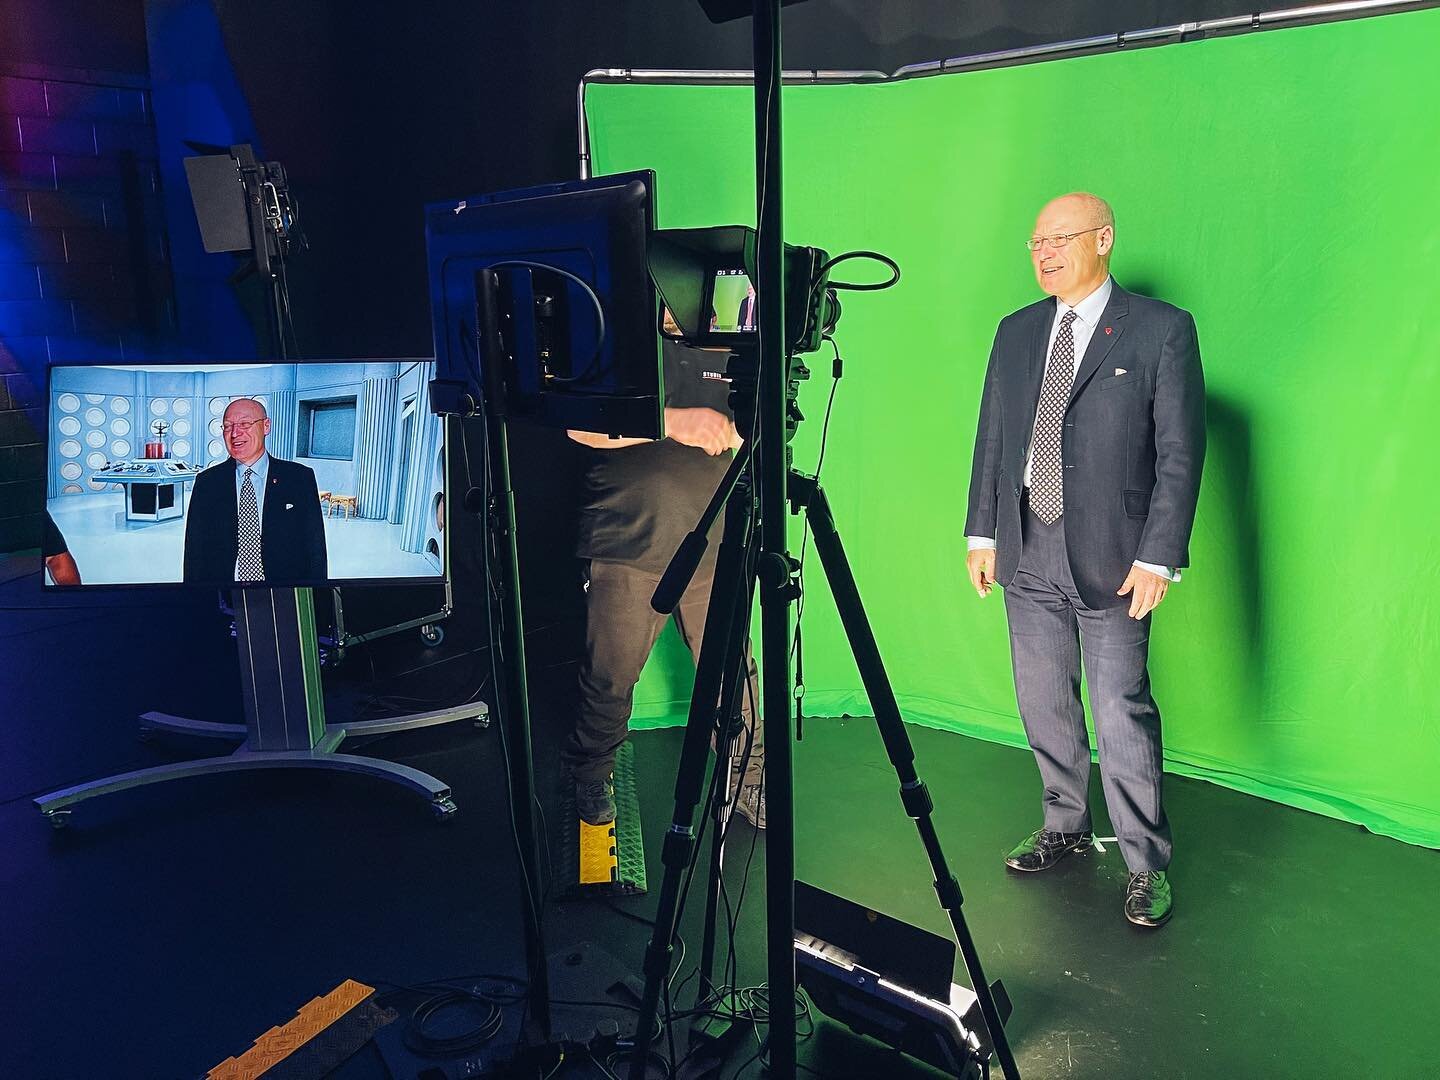 🇮🇲 What an absolute pleasure it was showing the Lieutenant Governor Sir John Lorimer around our Studio. 

We went right through every aspect of our facility, showcasing live demonstrations with our cameras, virtual green-screen studio, audio set up